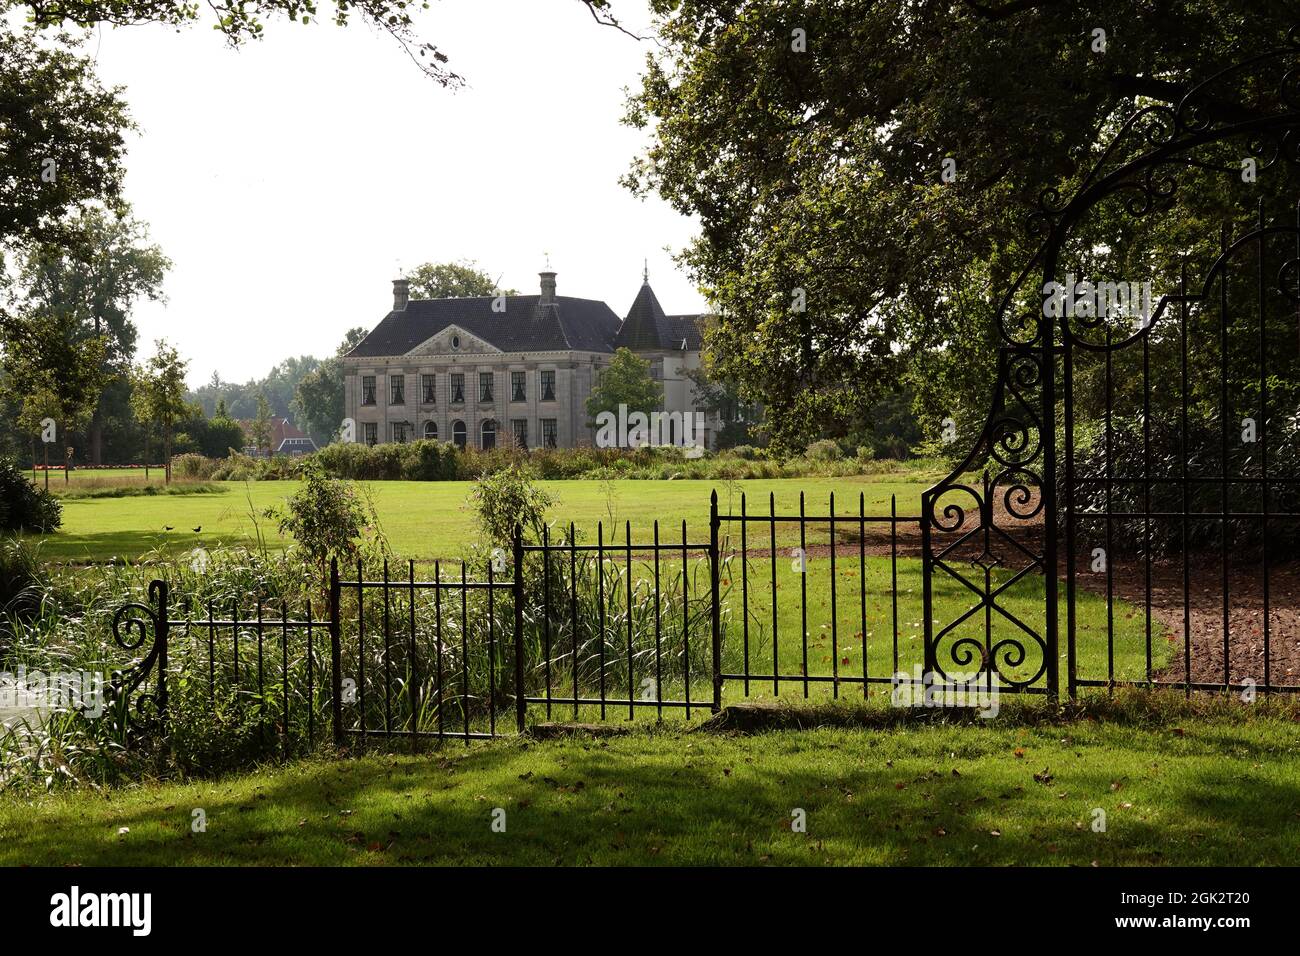 Denekamp, the Netherlands - Sept 12 2021 The stately Manor Singraven with a neoclassical facade  is part of an estate with a very long history Stock Photo